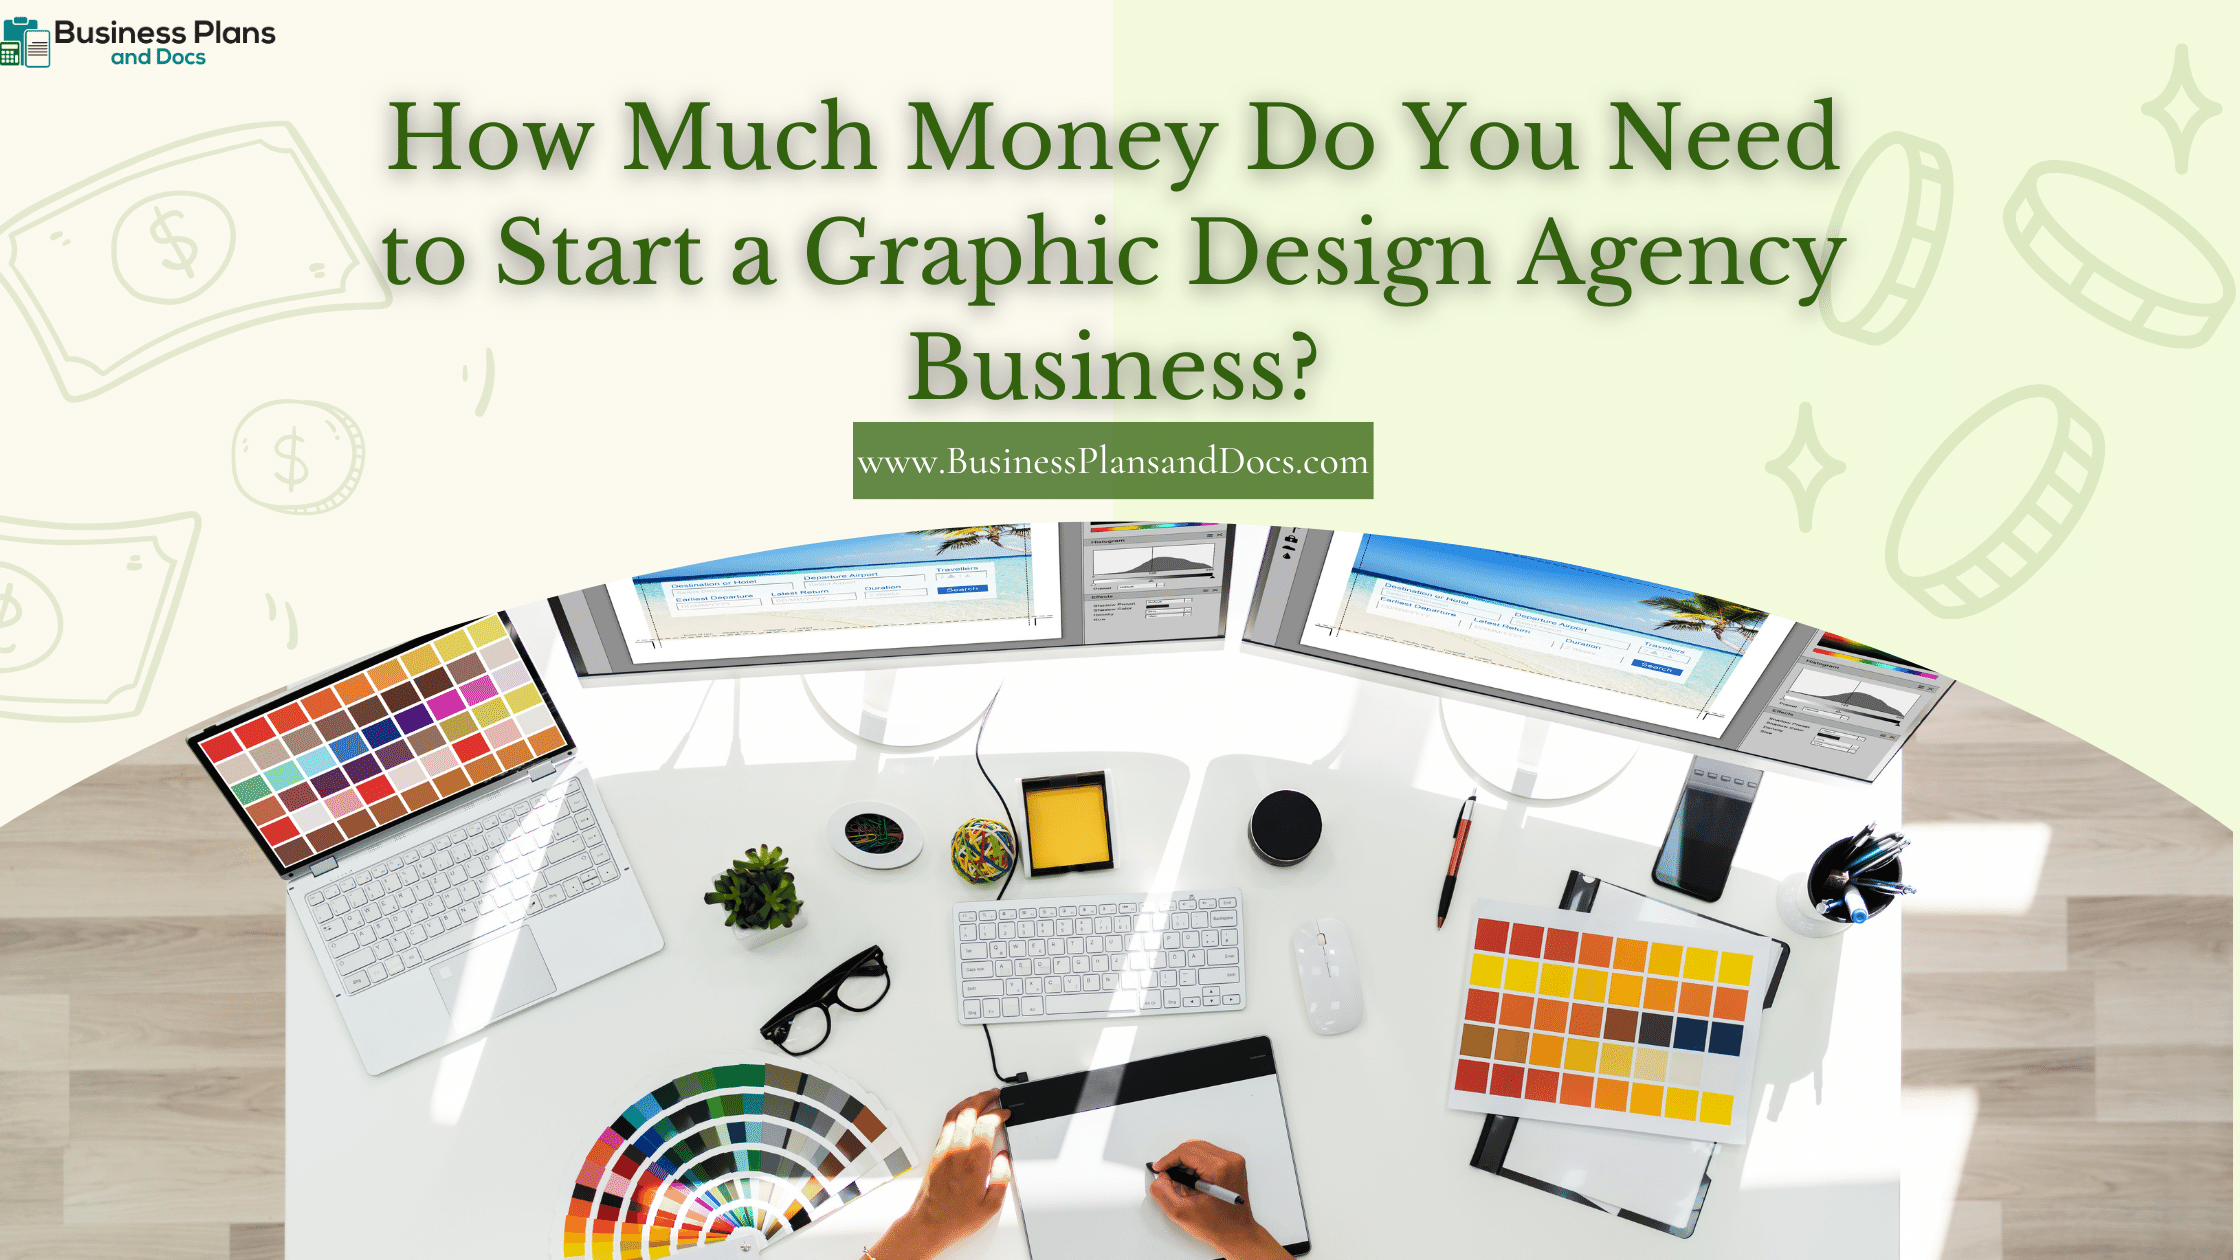 How Much Money Do You Need to Start a Graphic Design Agency Business?